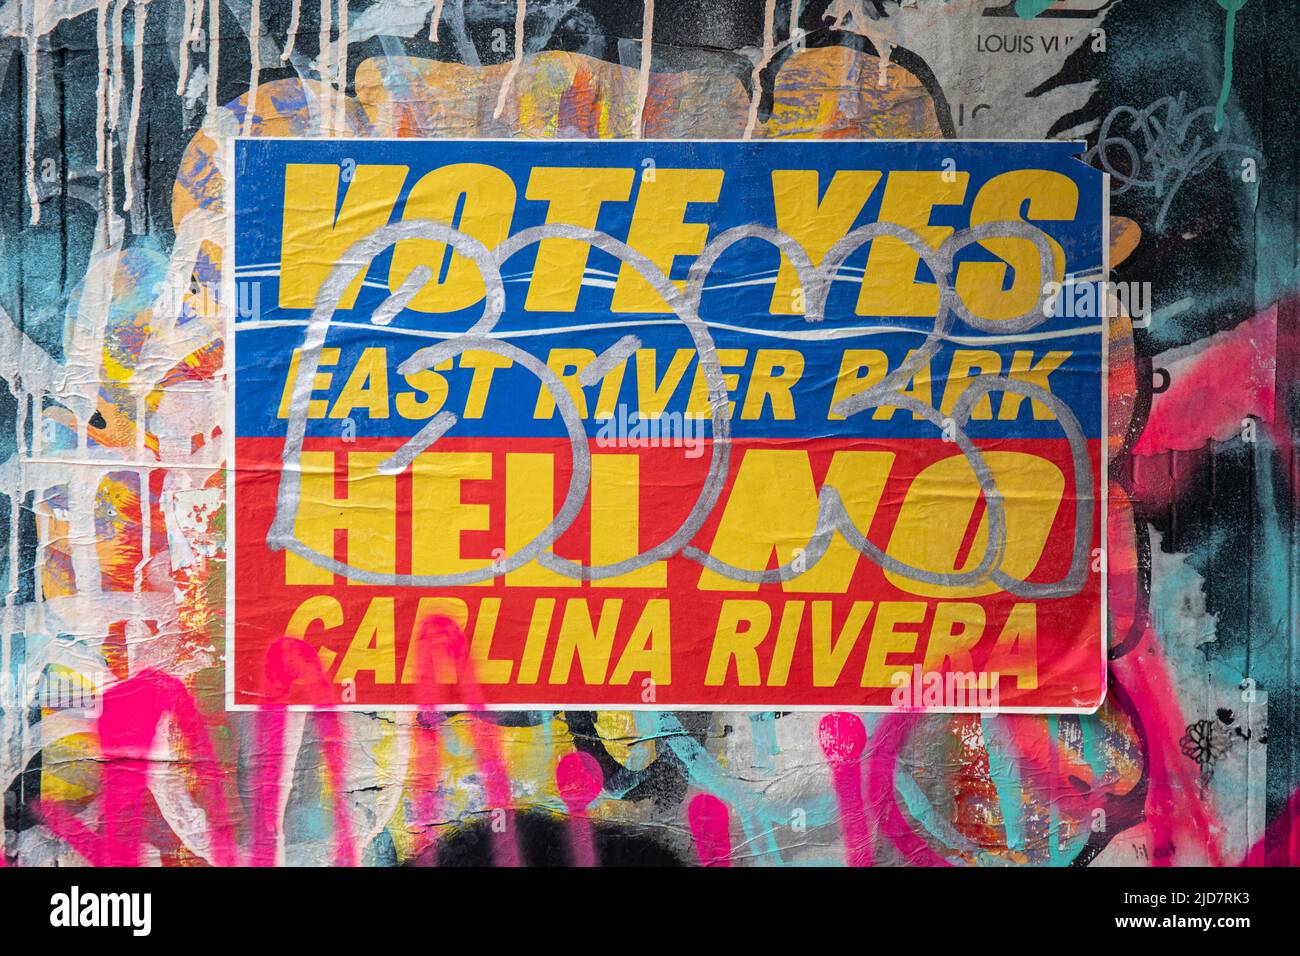 Vote Yes East River Park. Hell No Carlina Rivera. Political sticker in Alphabet City district of New York City, United States of America. Stock Photo